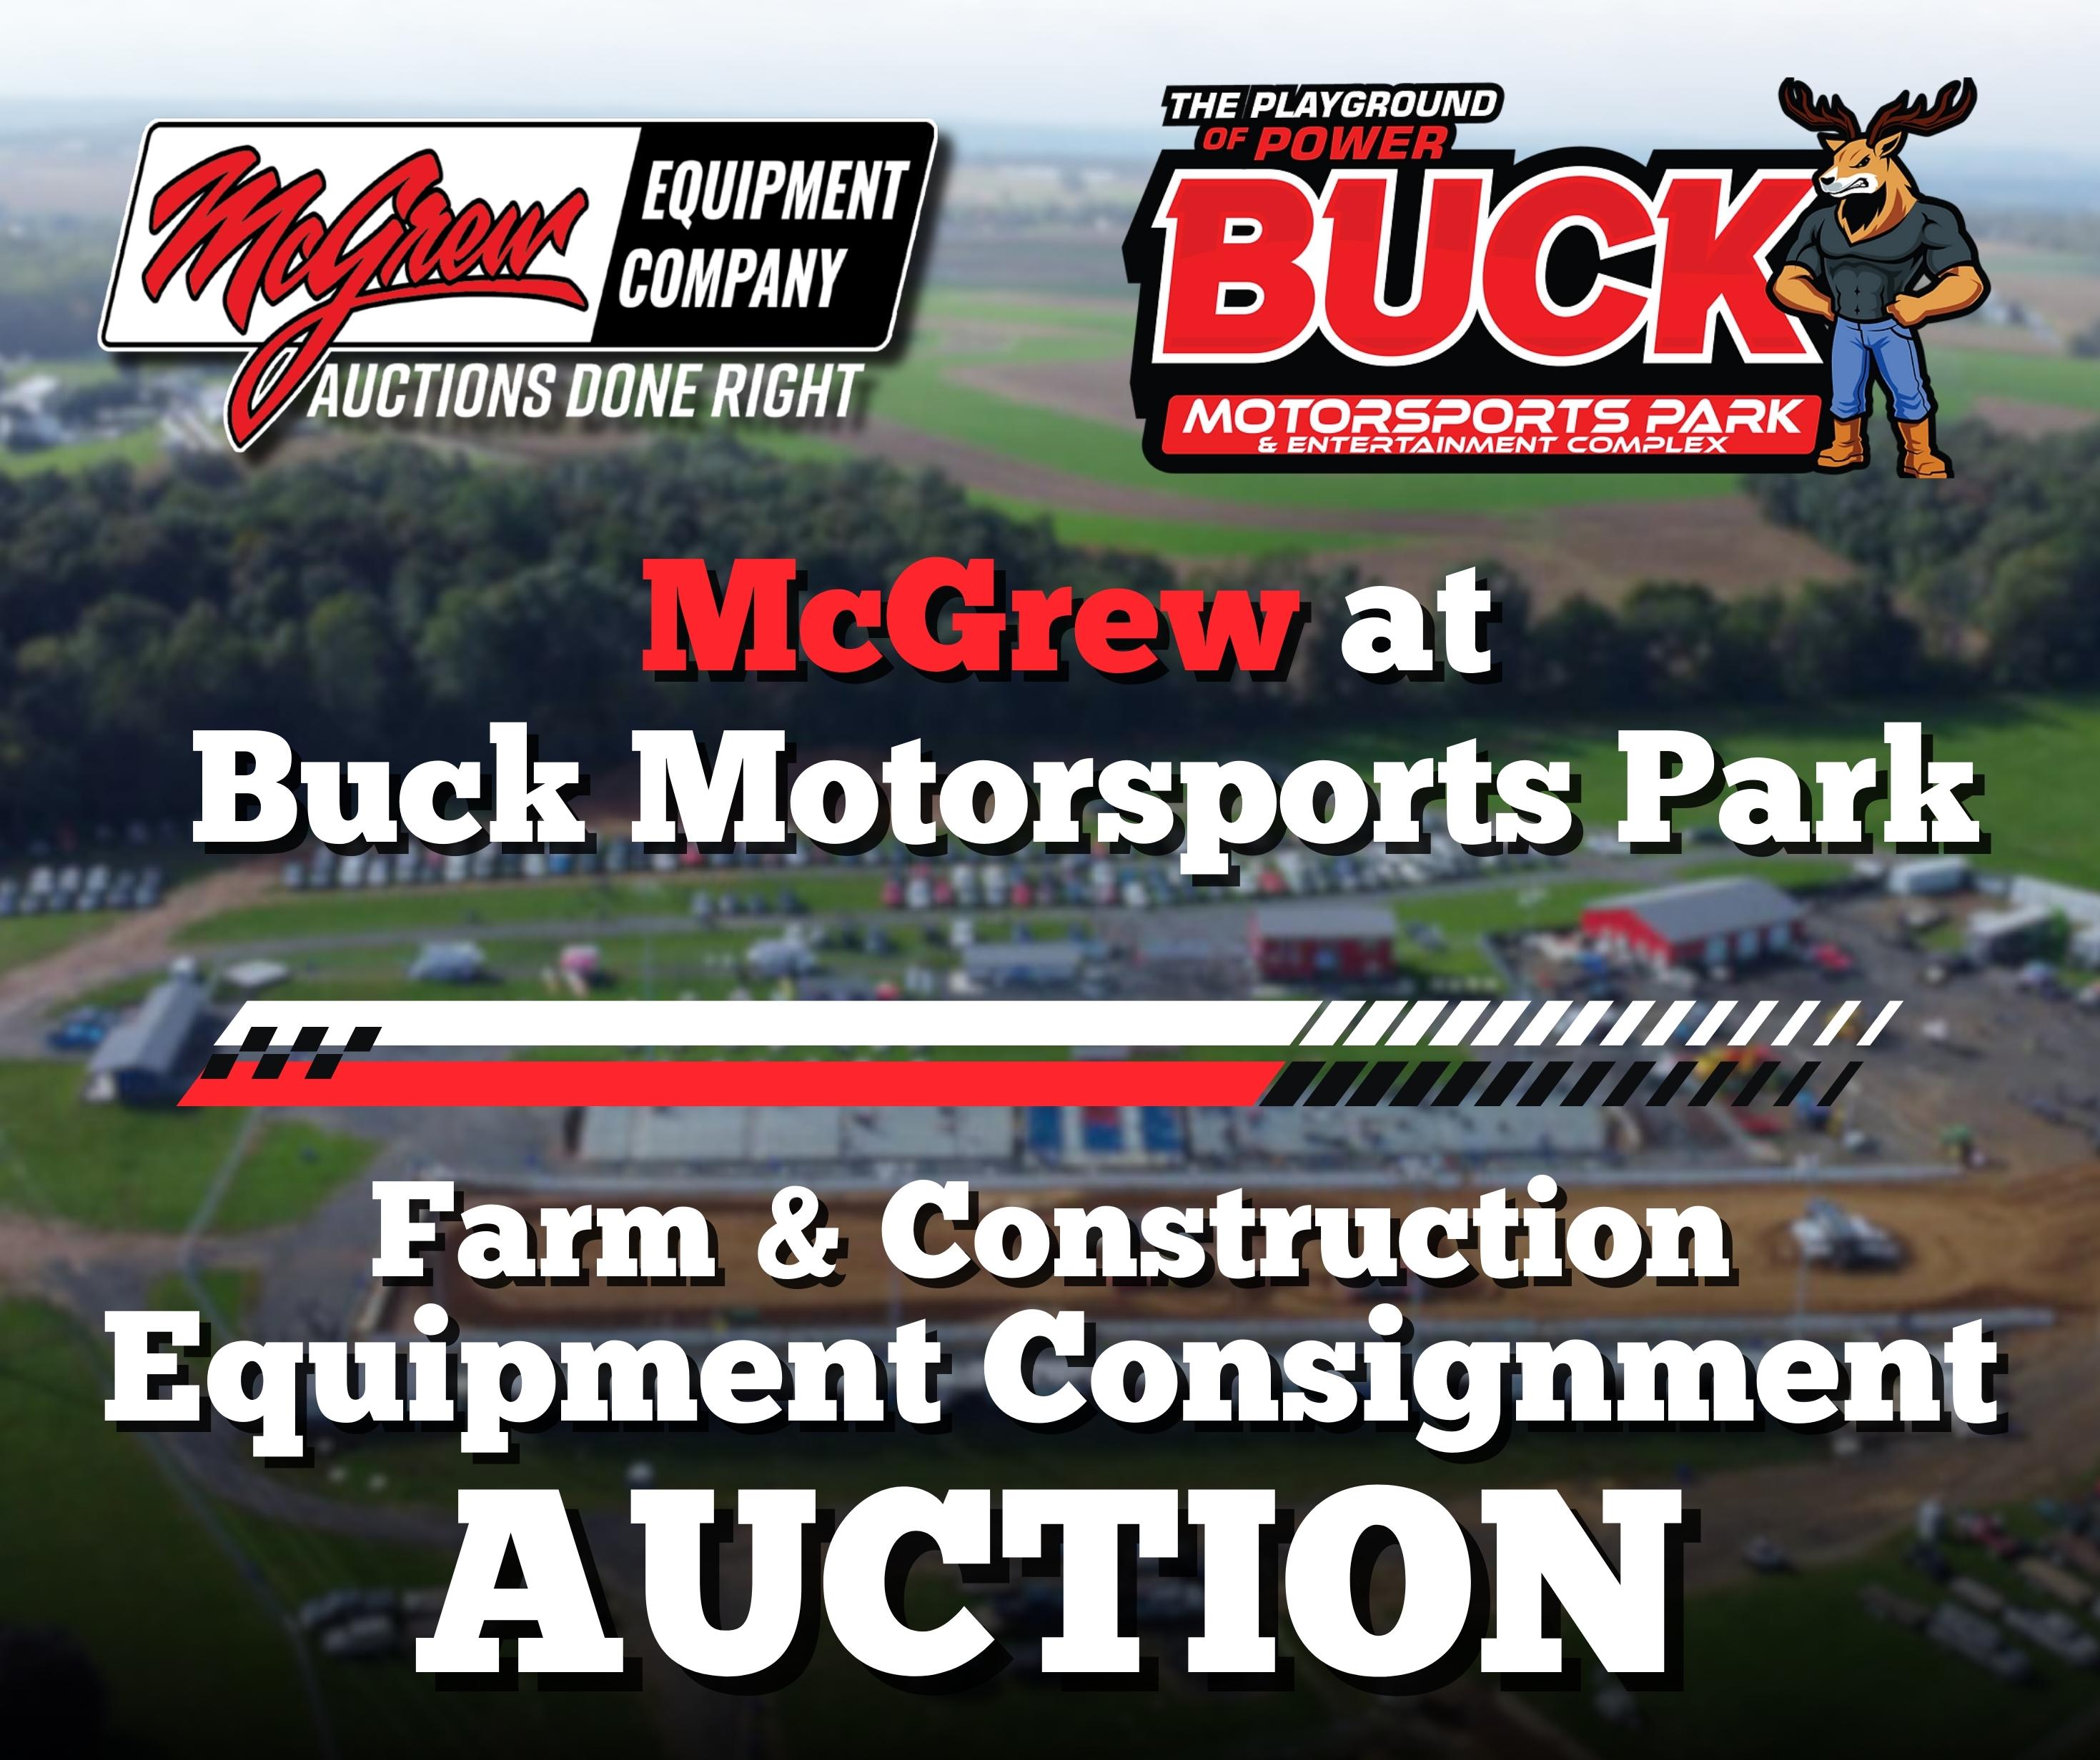 McGrew Equipment's 2nd Semi-Annual Buck Motorsports Park Consignment Auction